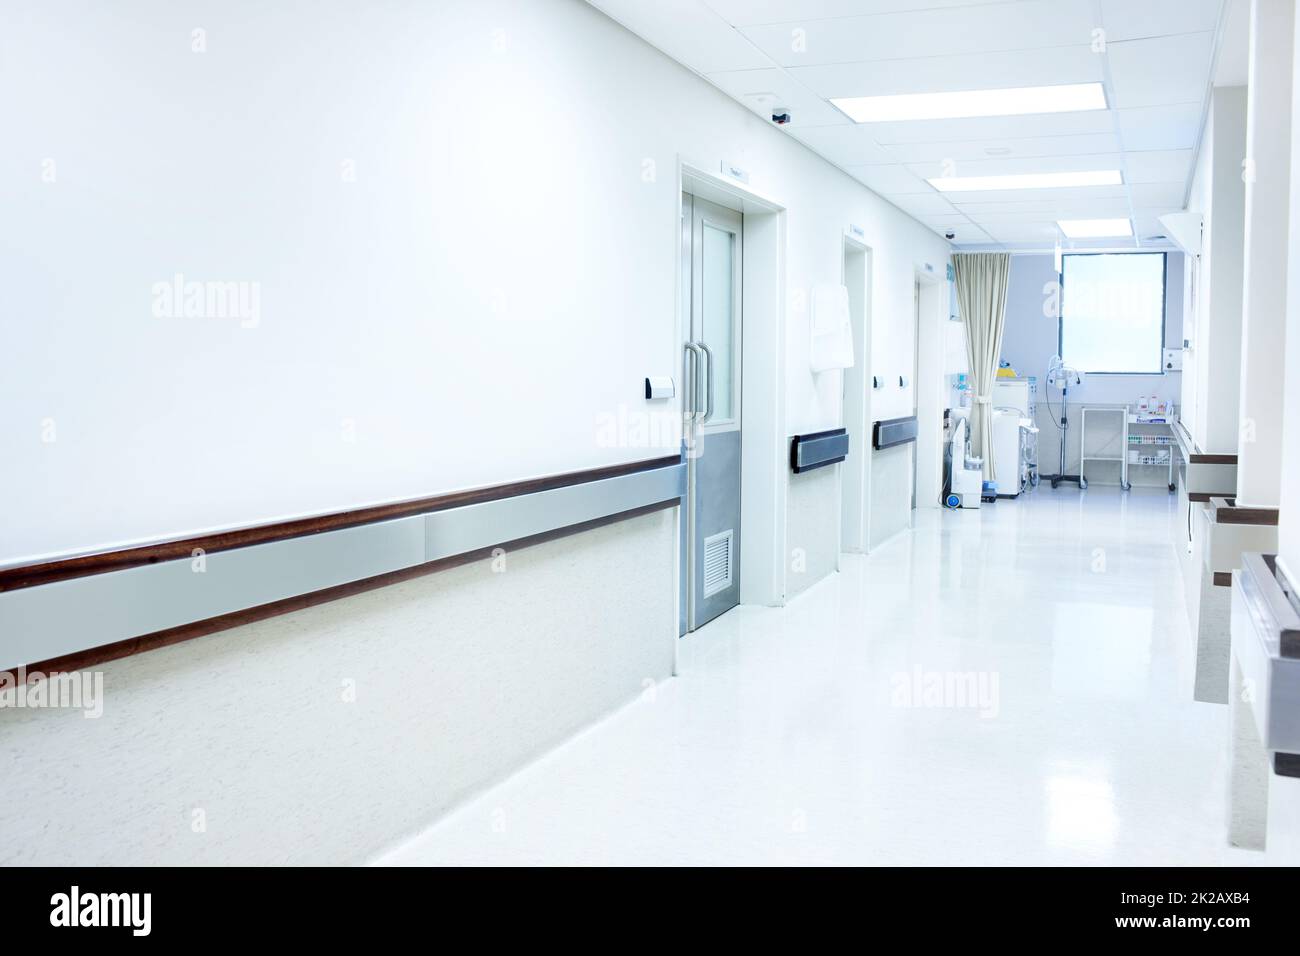 A hospital you can fell secure in. An empty passage way inside of a hospital. Stock Photo